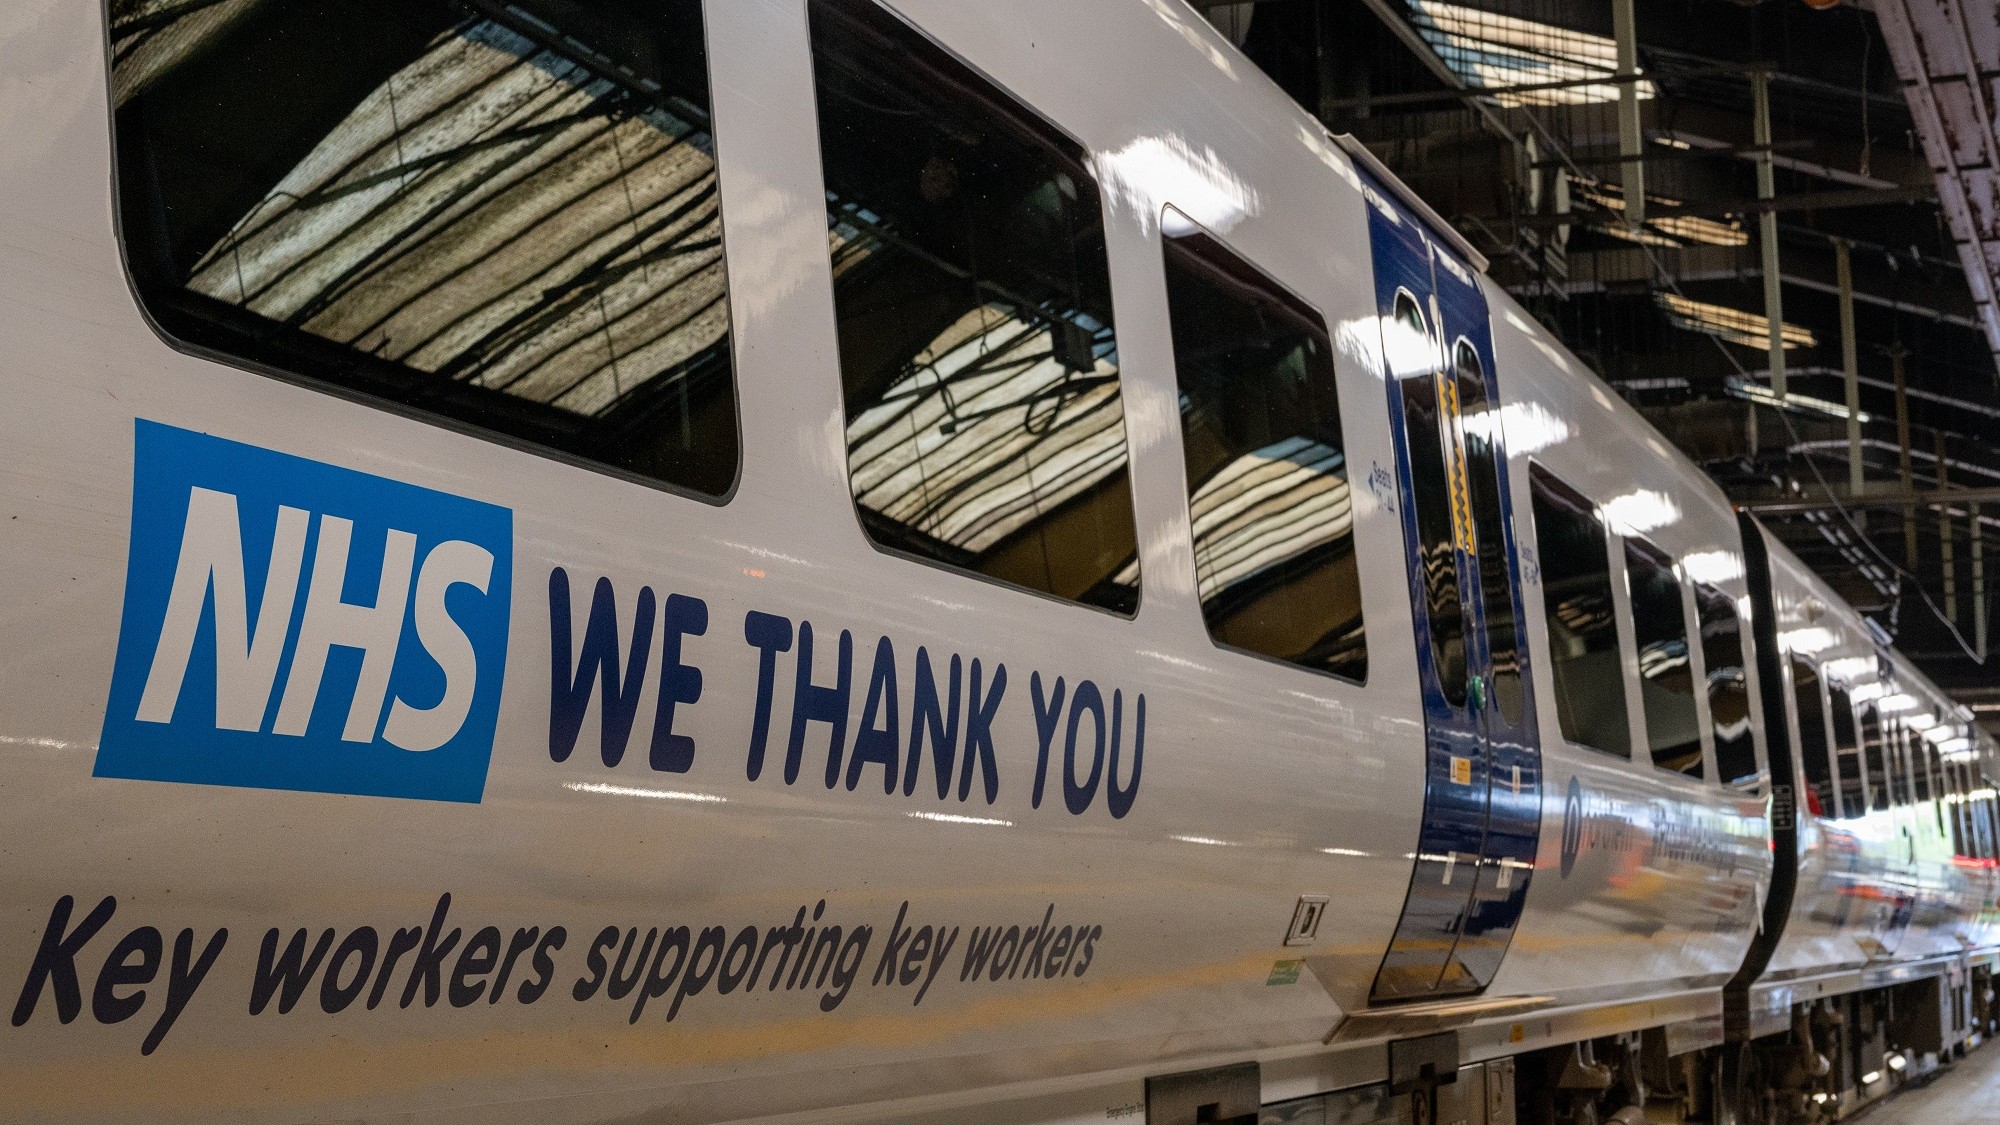 Image shows Northern train with NHS thank you message